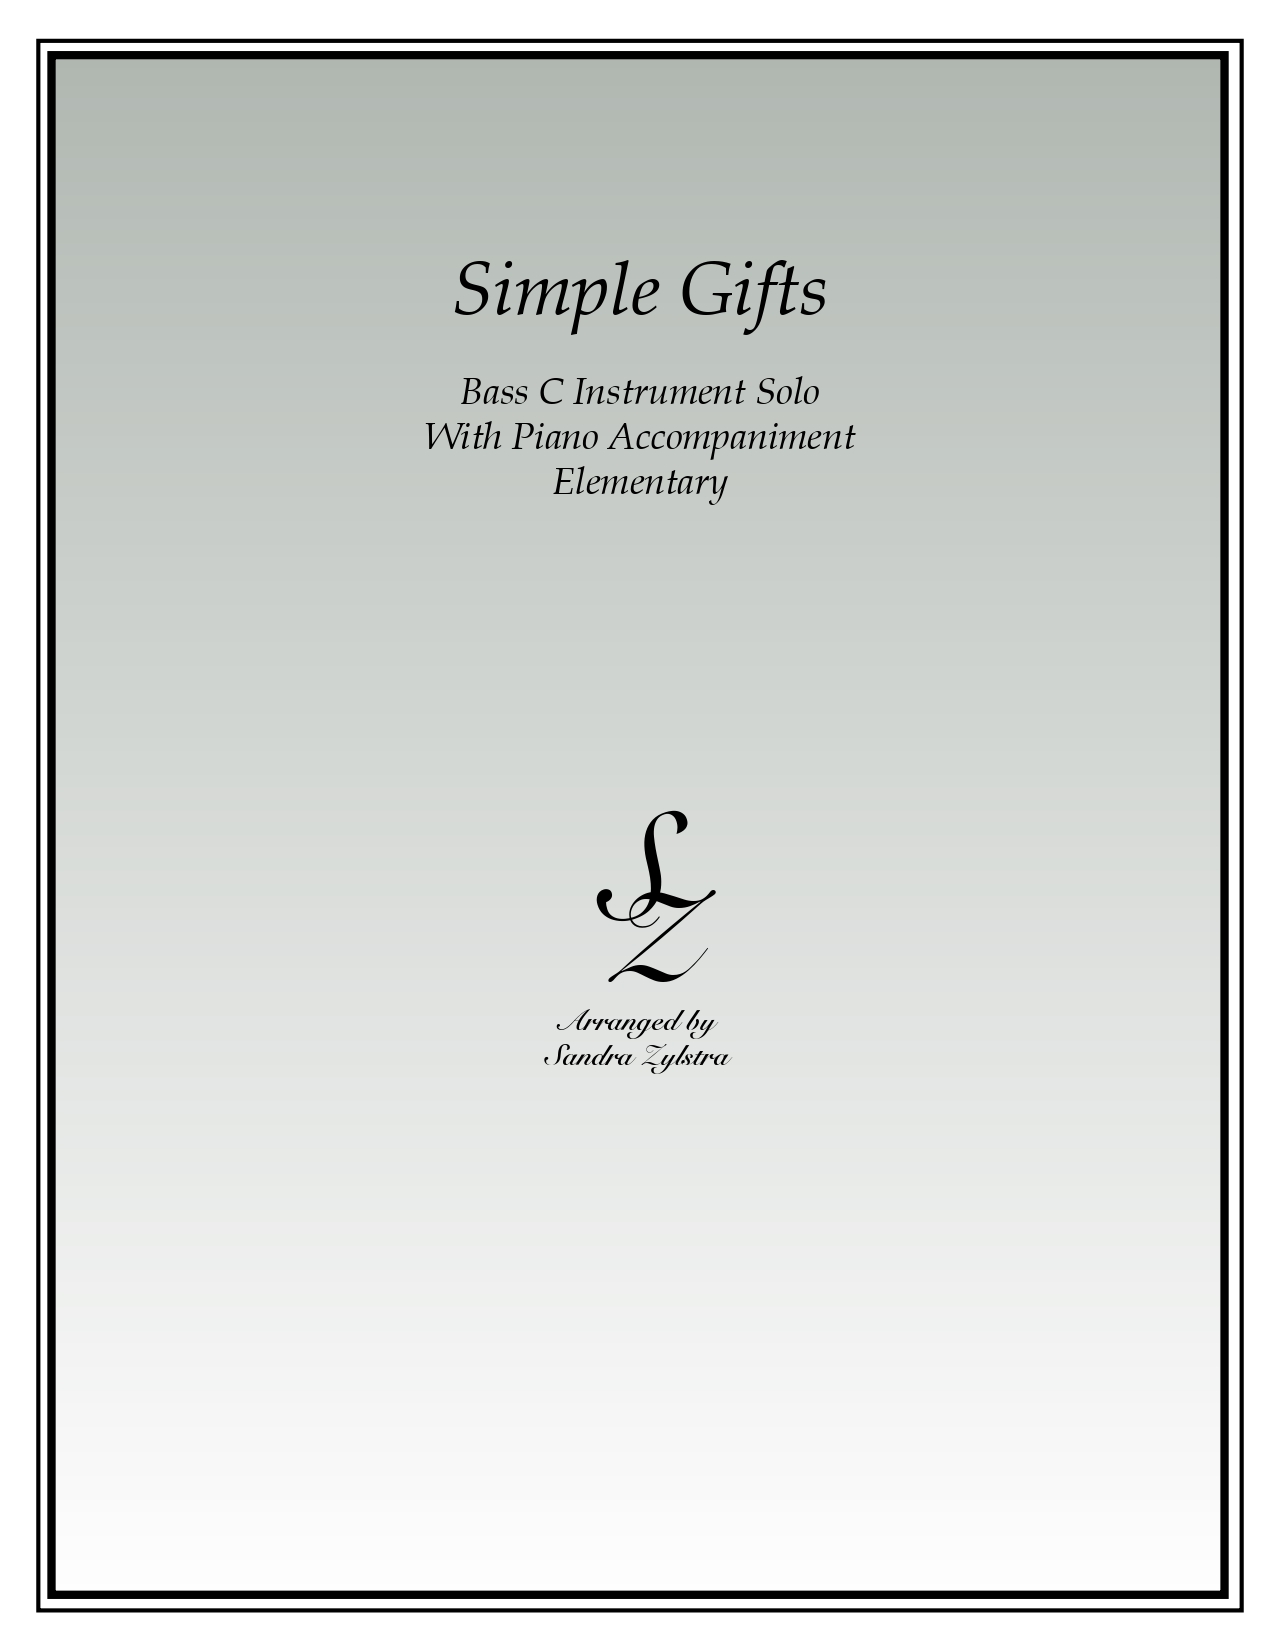 Simple Gifts bass C instrument solo part cover page 00011